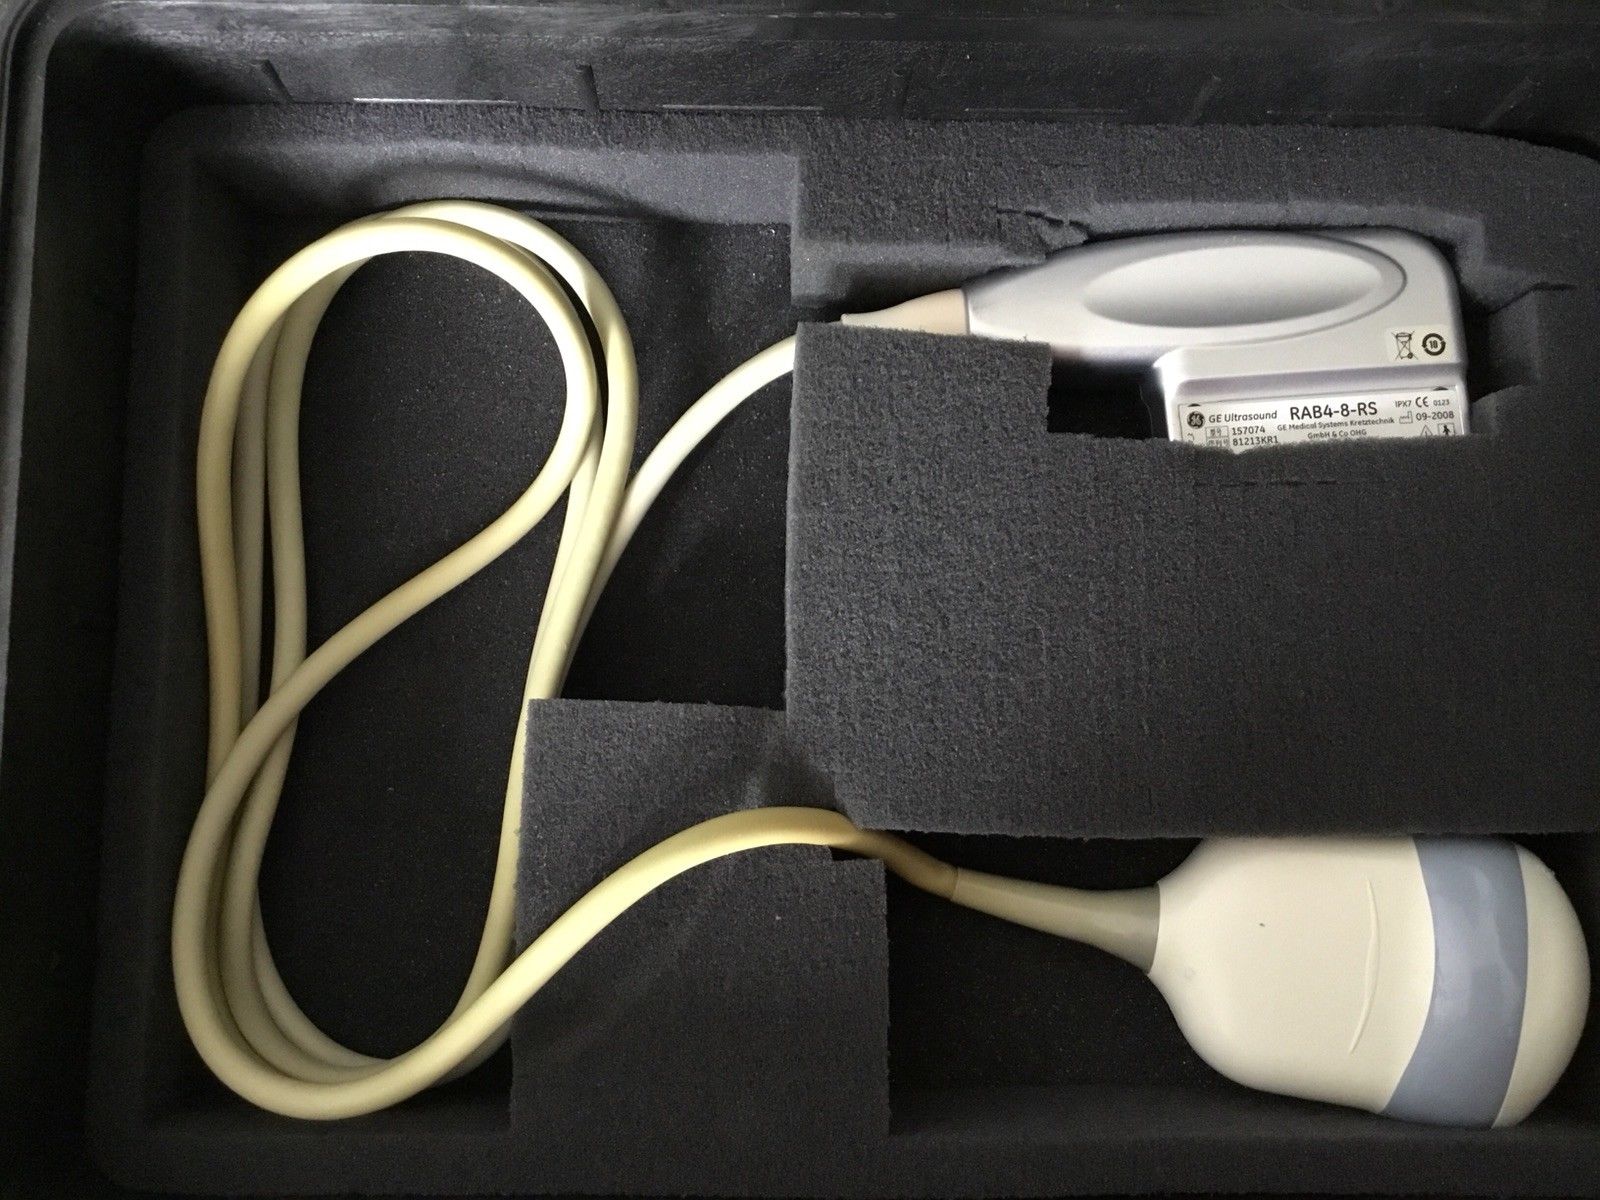 GE Voluson i Portable Ultrasound System and 4D Transducer probe, Protective case DIAGNOSTIC ULTRASOUND MACHINES FOR SALE